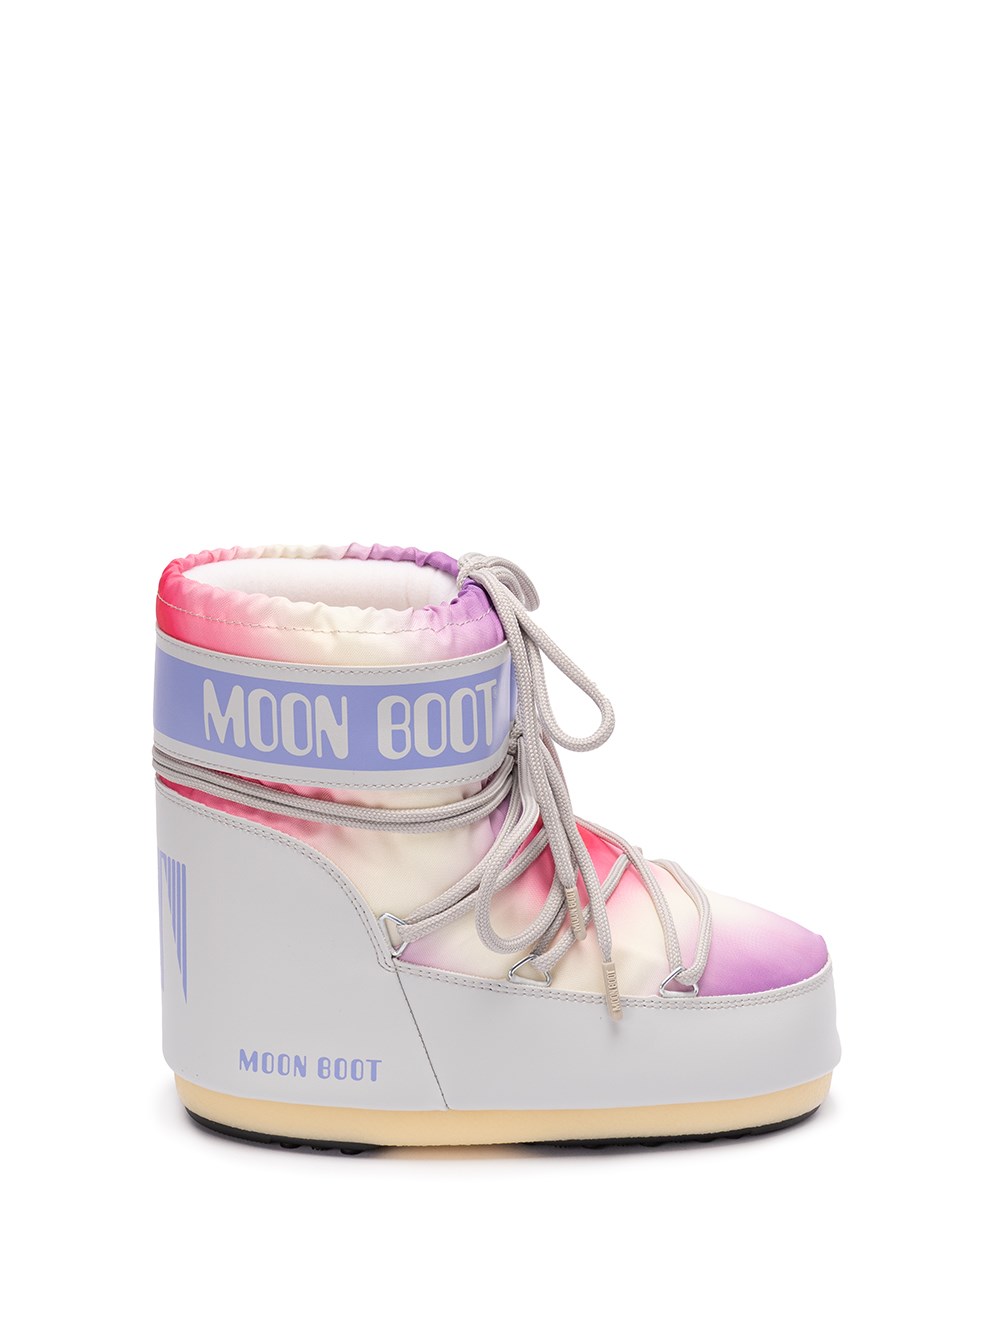 MOON BOOT `ICON LOW TIE DYE` BOOTS